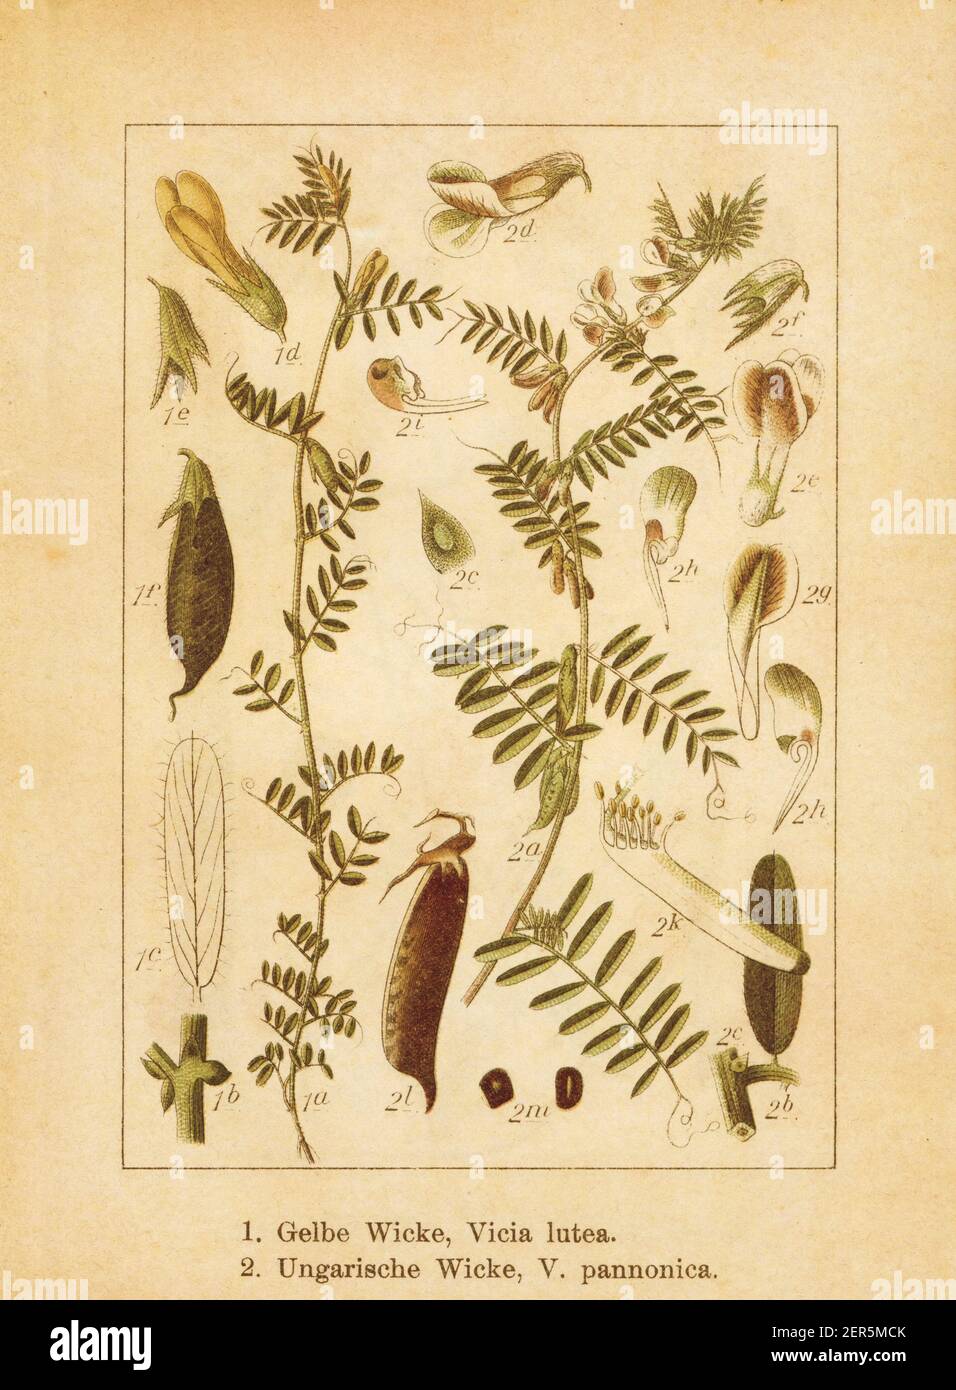 Antique illustration of a vicia lutea (also known as smooth yellow vetch or yellow vetch) and vicia pannonica (also known as Hungarian vetch). Engrave Stock Photo